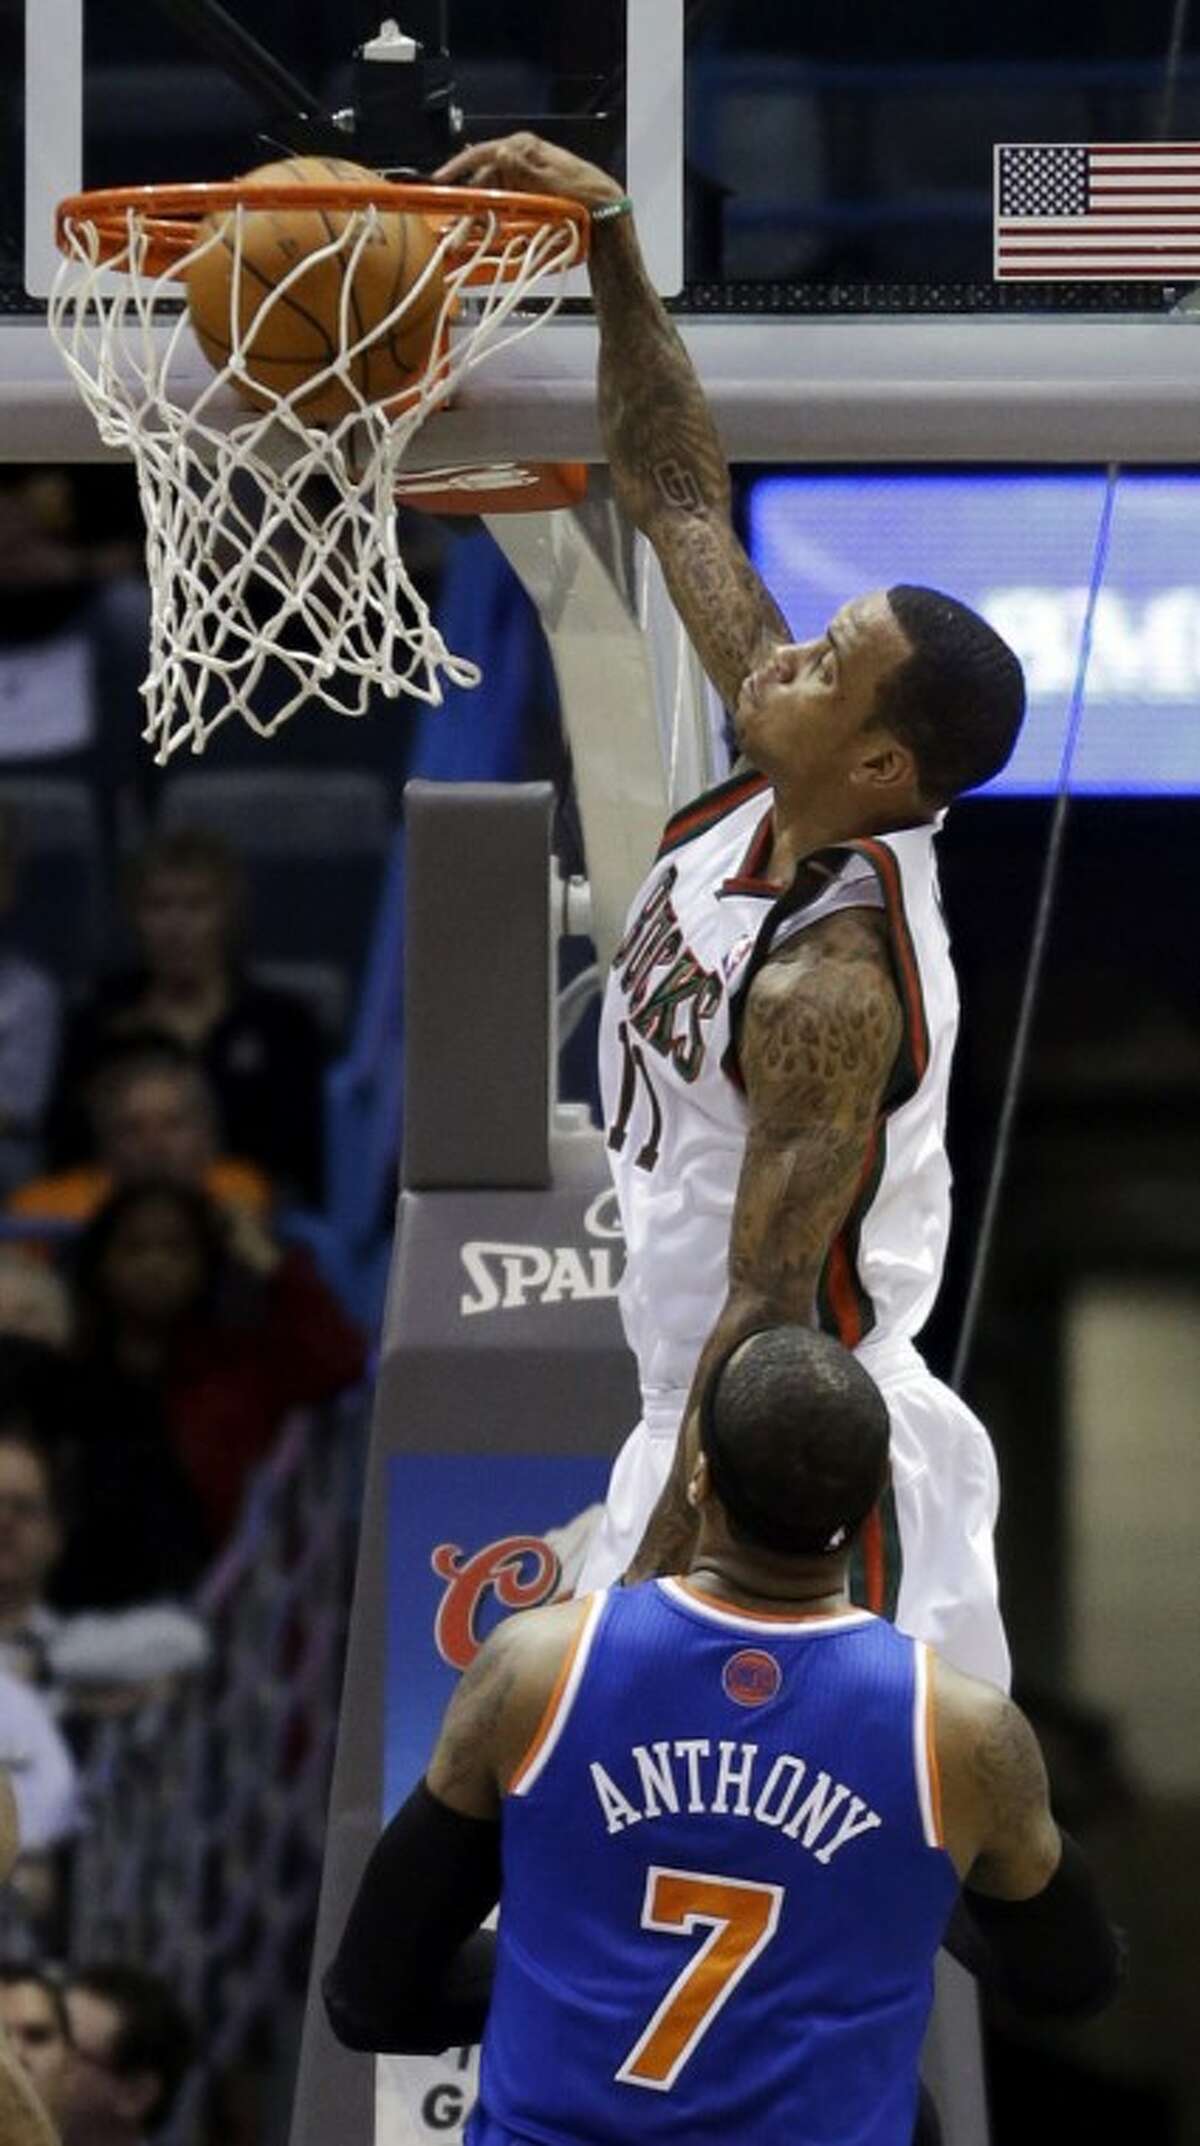 New York Knicks' Carmelo Anthony (7) watches as Milwaukee Bucks' Monta Ellis (11) dunks during the first half of an NBA basketball game Wednesday, Nov. 28, 2012, in Milwaukee. (AP Photo/Morry Gash)